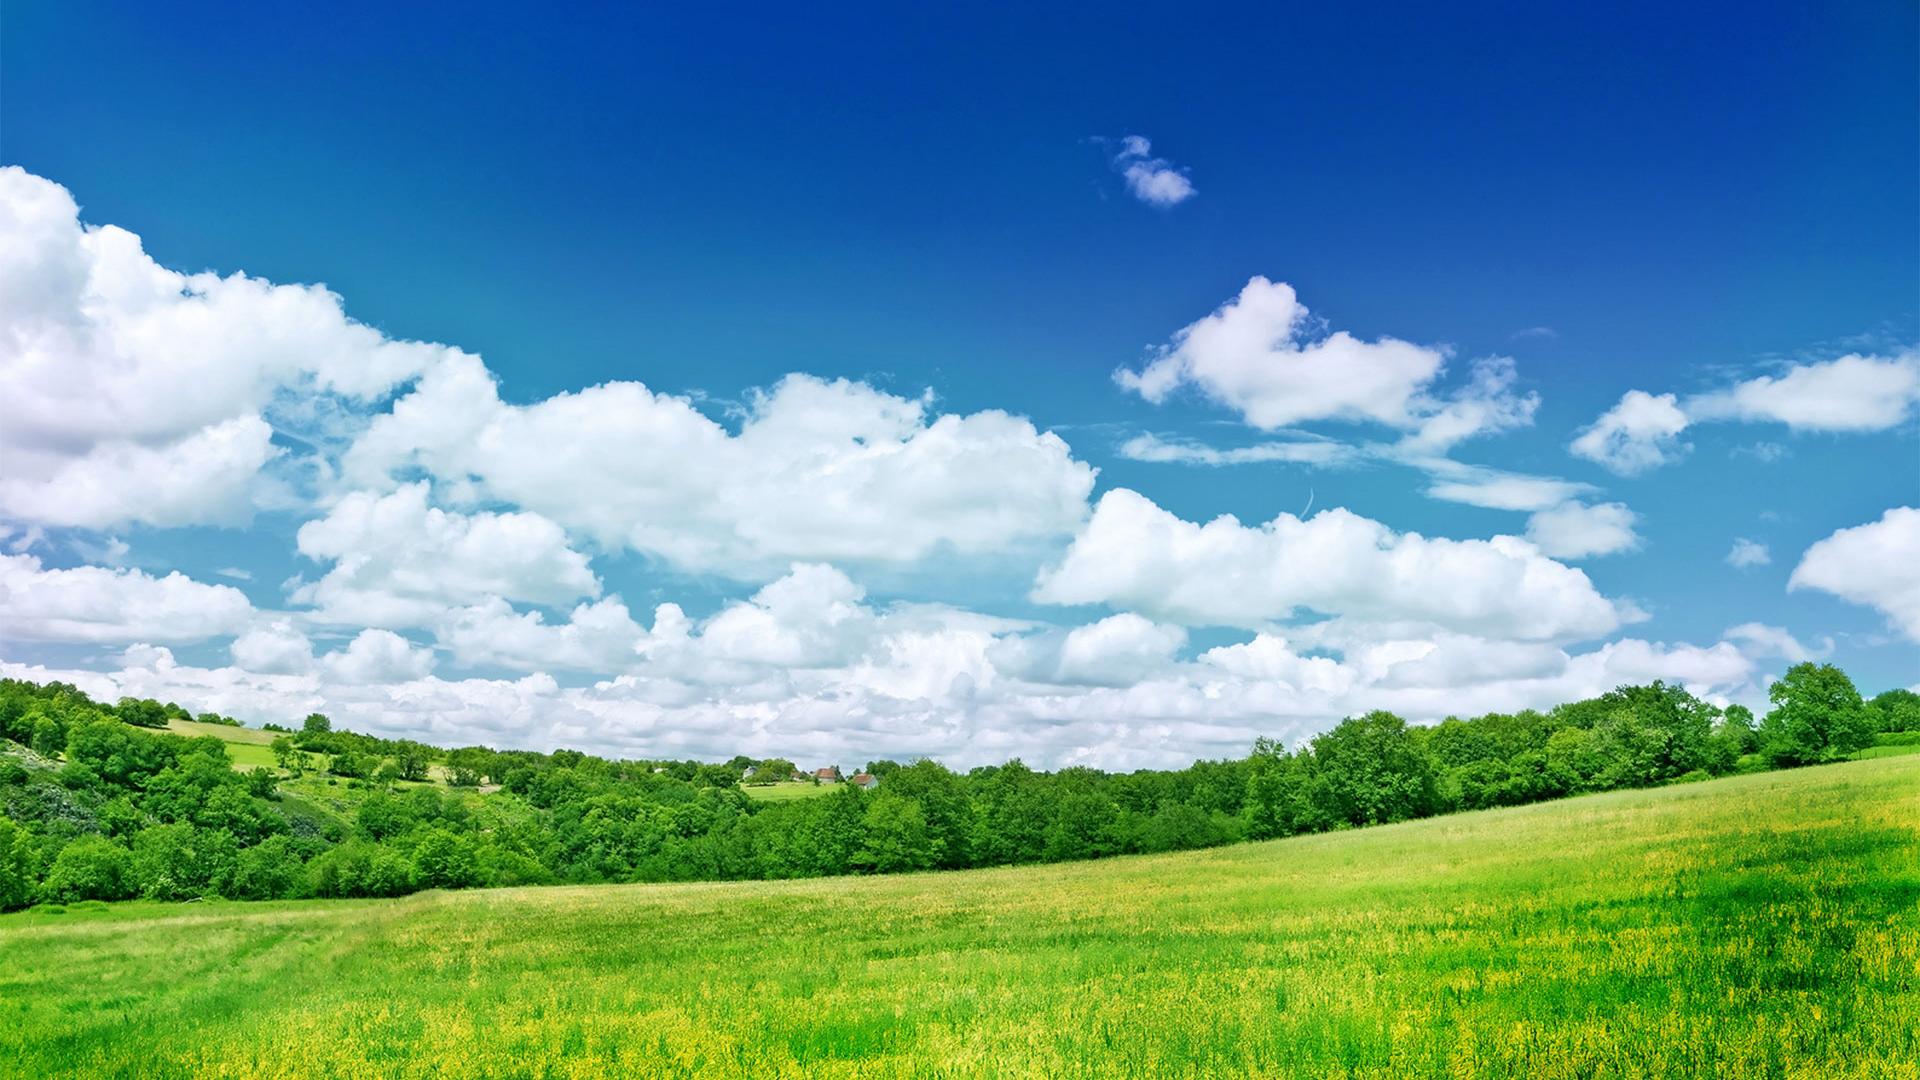  Grassland Scenery Backgrounds Widescreen and HD background Wallpaper